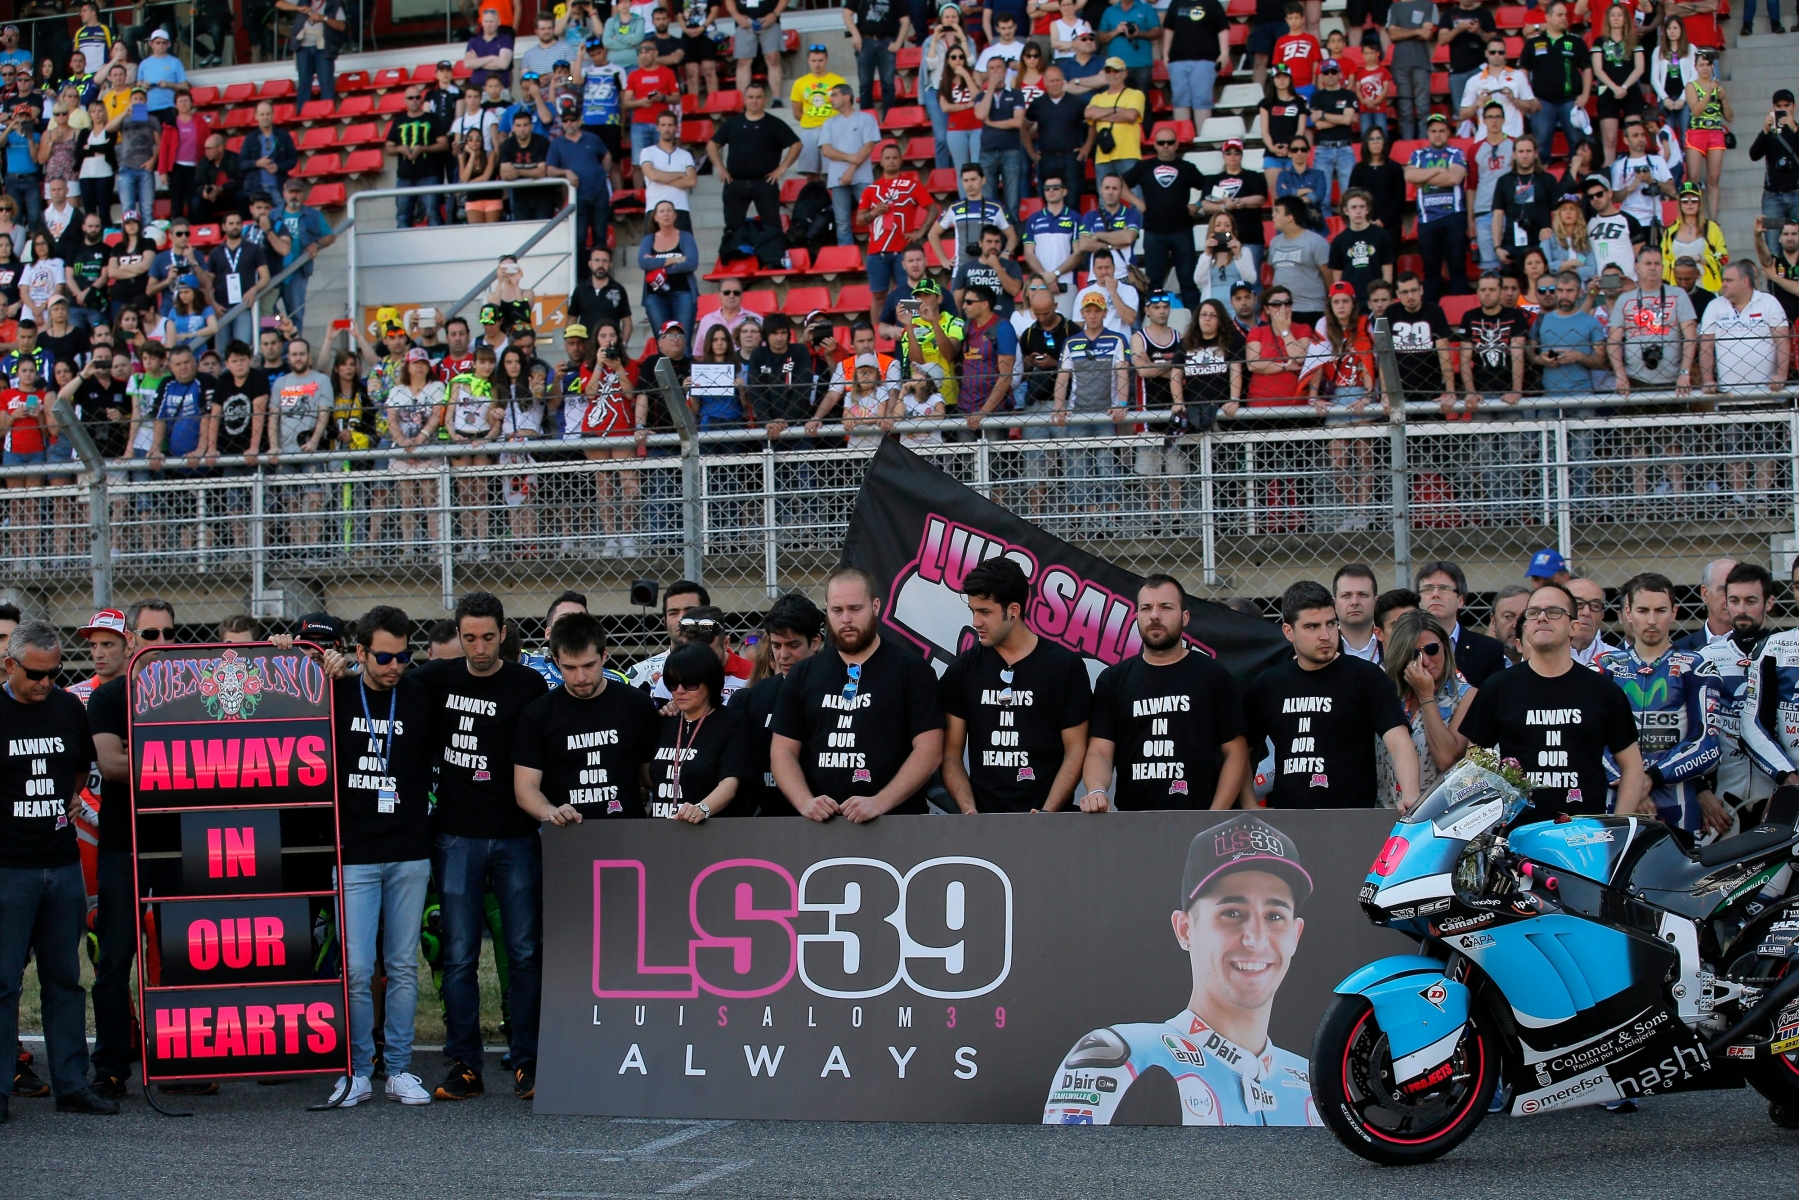 Riders, mechanics and staff gather around the motorcycle and a photo of Moto 2 rider Luis Salom during a minute of silence in his memory before the Catalunya Motorcycle Grand Prix at the Barcelona Catalunya racetrack in Montmelo, just outside Barcelona, Spain, Sunday, June 5, 2016. Salom died in a crash during Friday's free practice for the Grand Prix. (AP Photo/Manu Fernandez) Spain Motorcycle Grand Prix